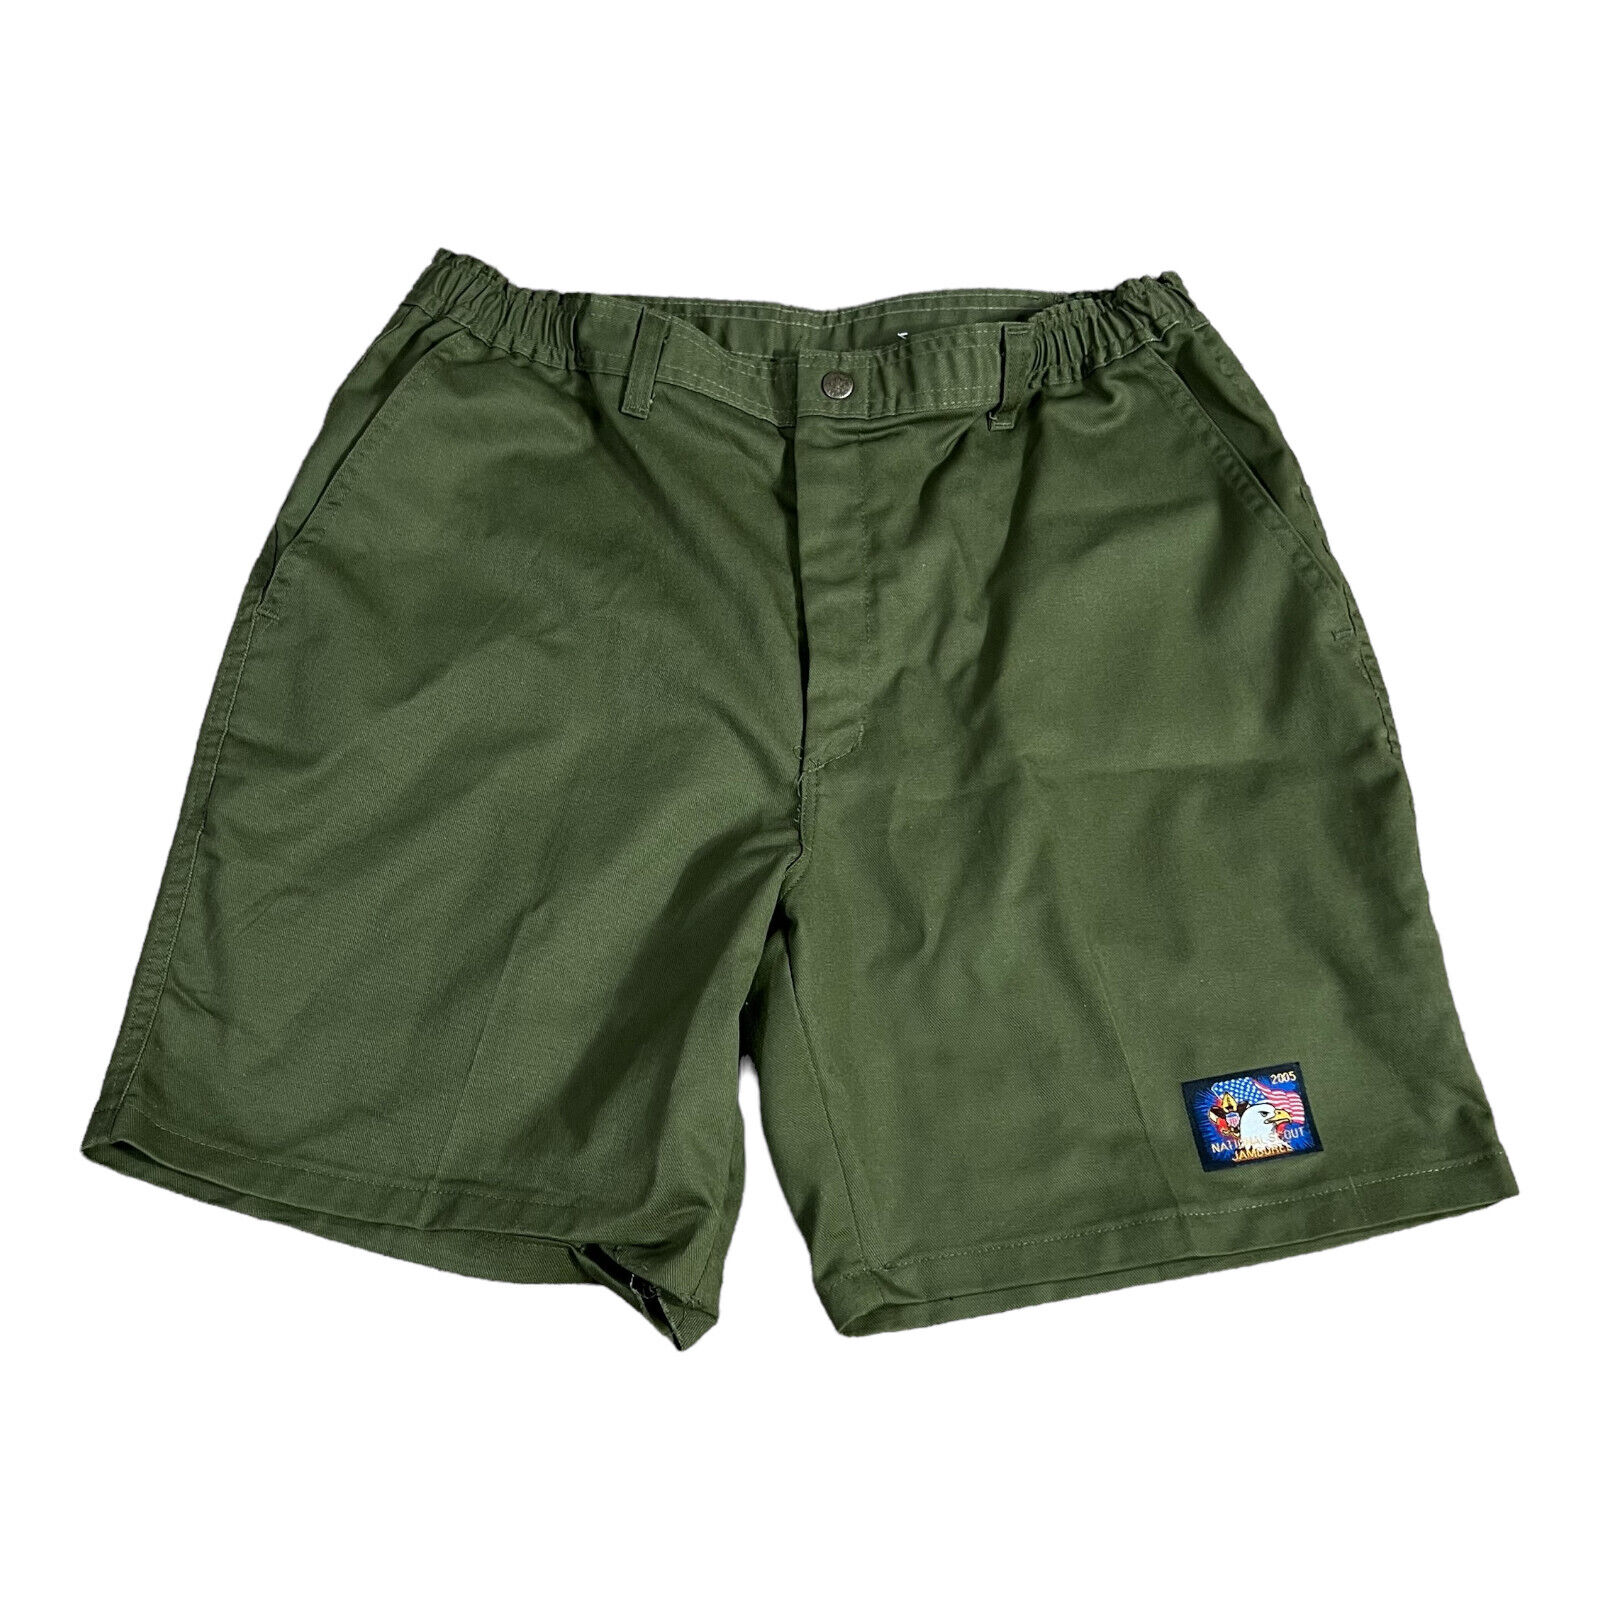 Vintage Boy Scouts of America Shorts Mens 36 Army Green 2005 National Jamboree